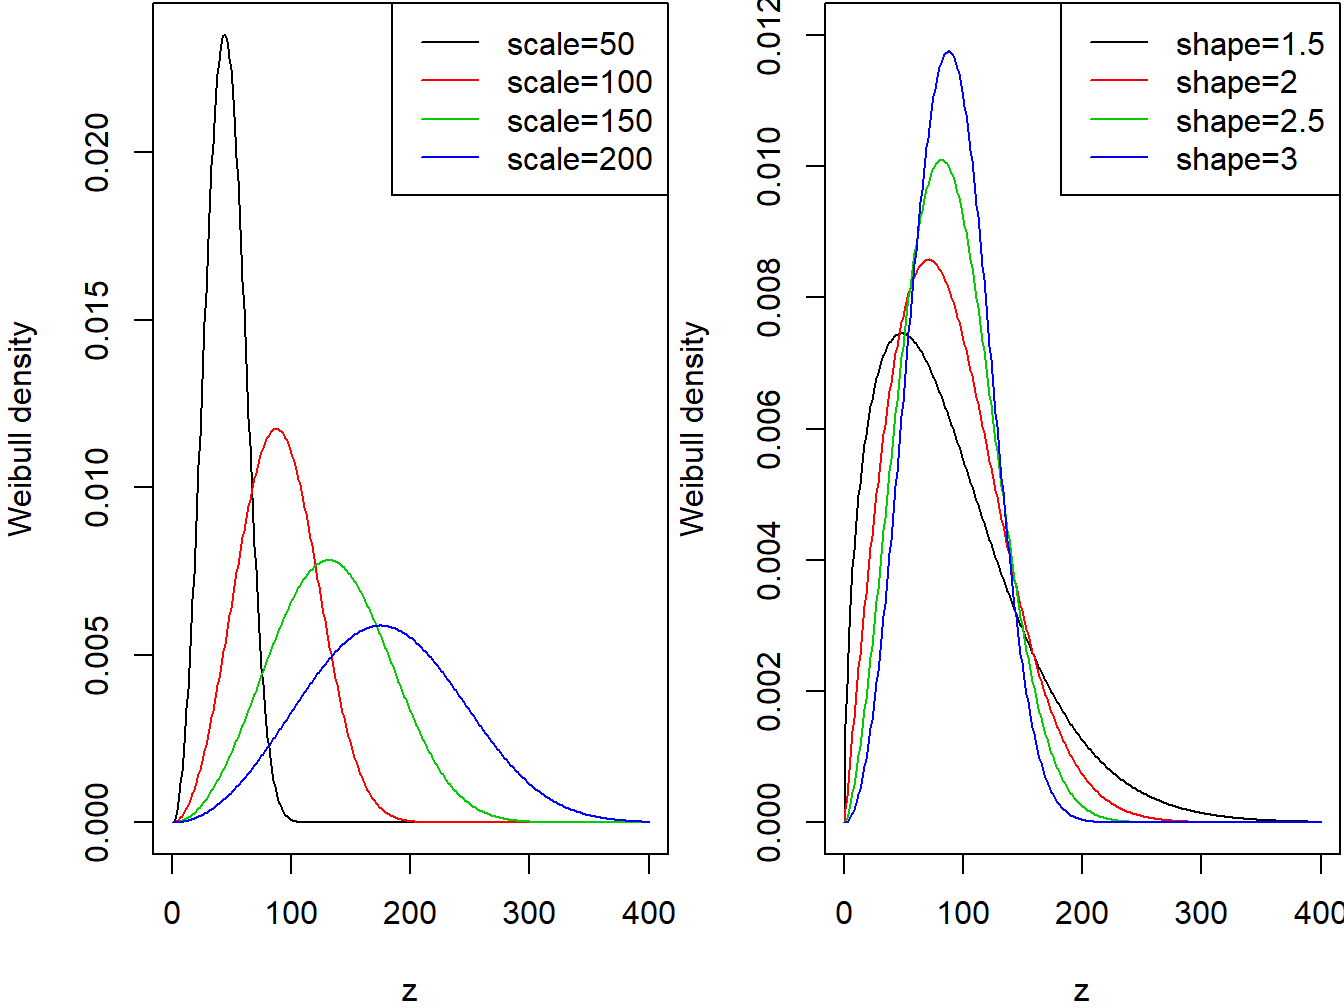 Weibull Densities. The left-hand panel is with shape=3 and varying scale. The right-hand panel is with scale=100 and varying shape.